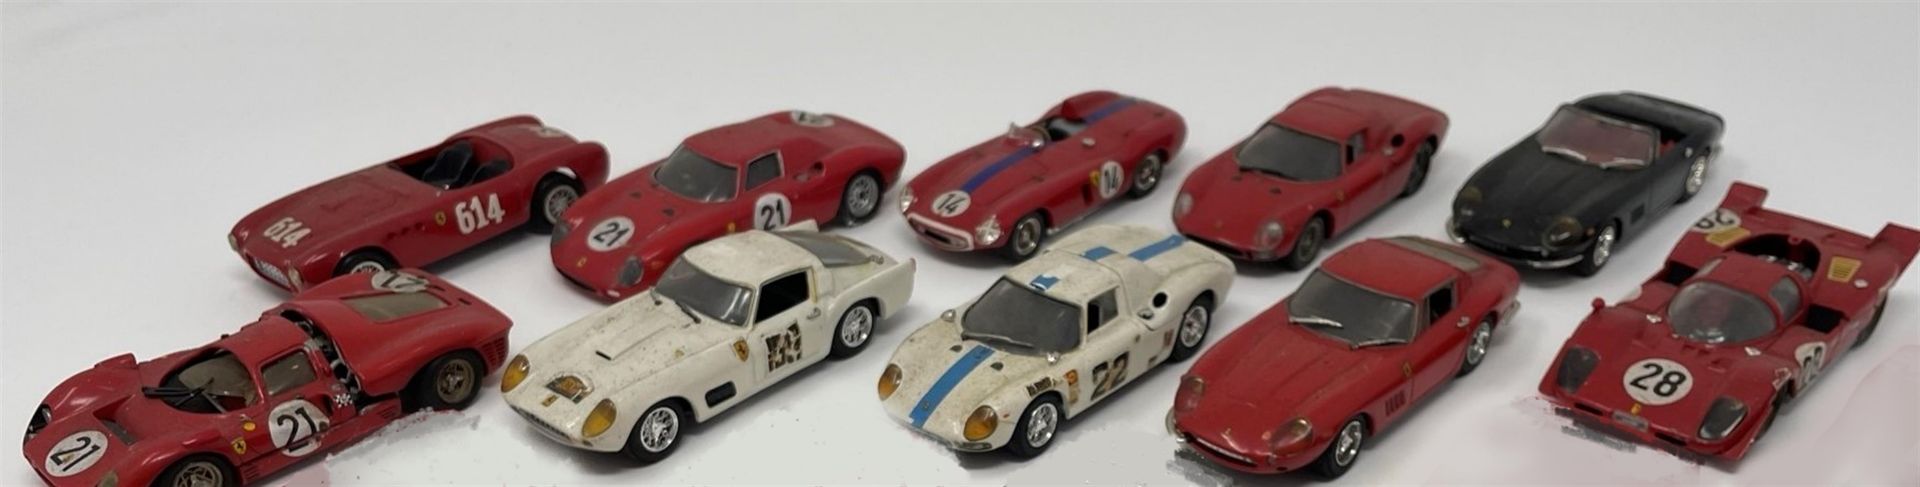 Ten 1/43rd Scale Ferrari Models from the 1950s, 60s and 70s - Image 2 of 10